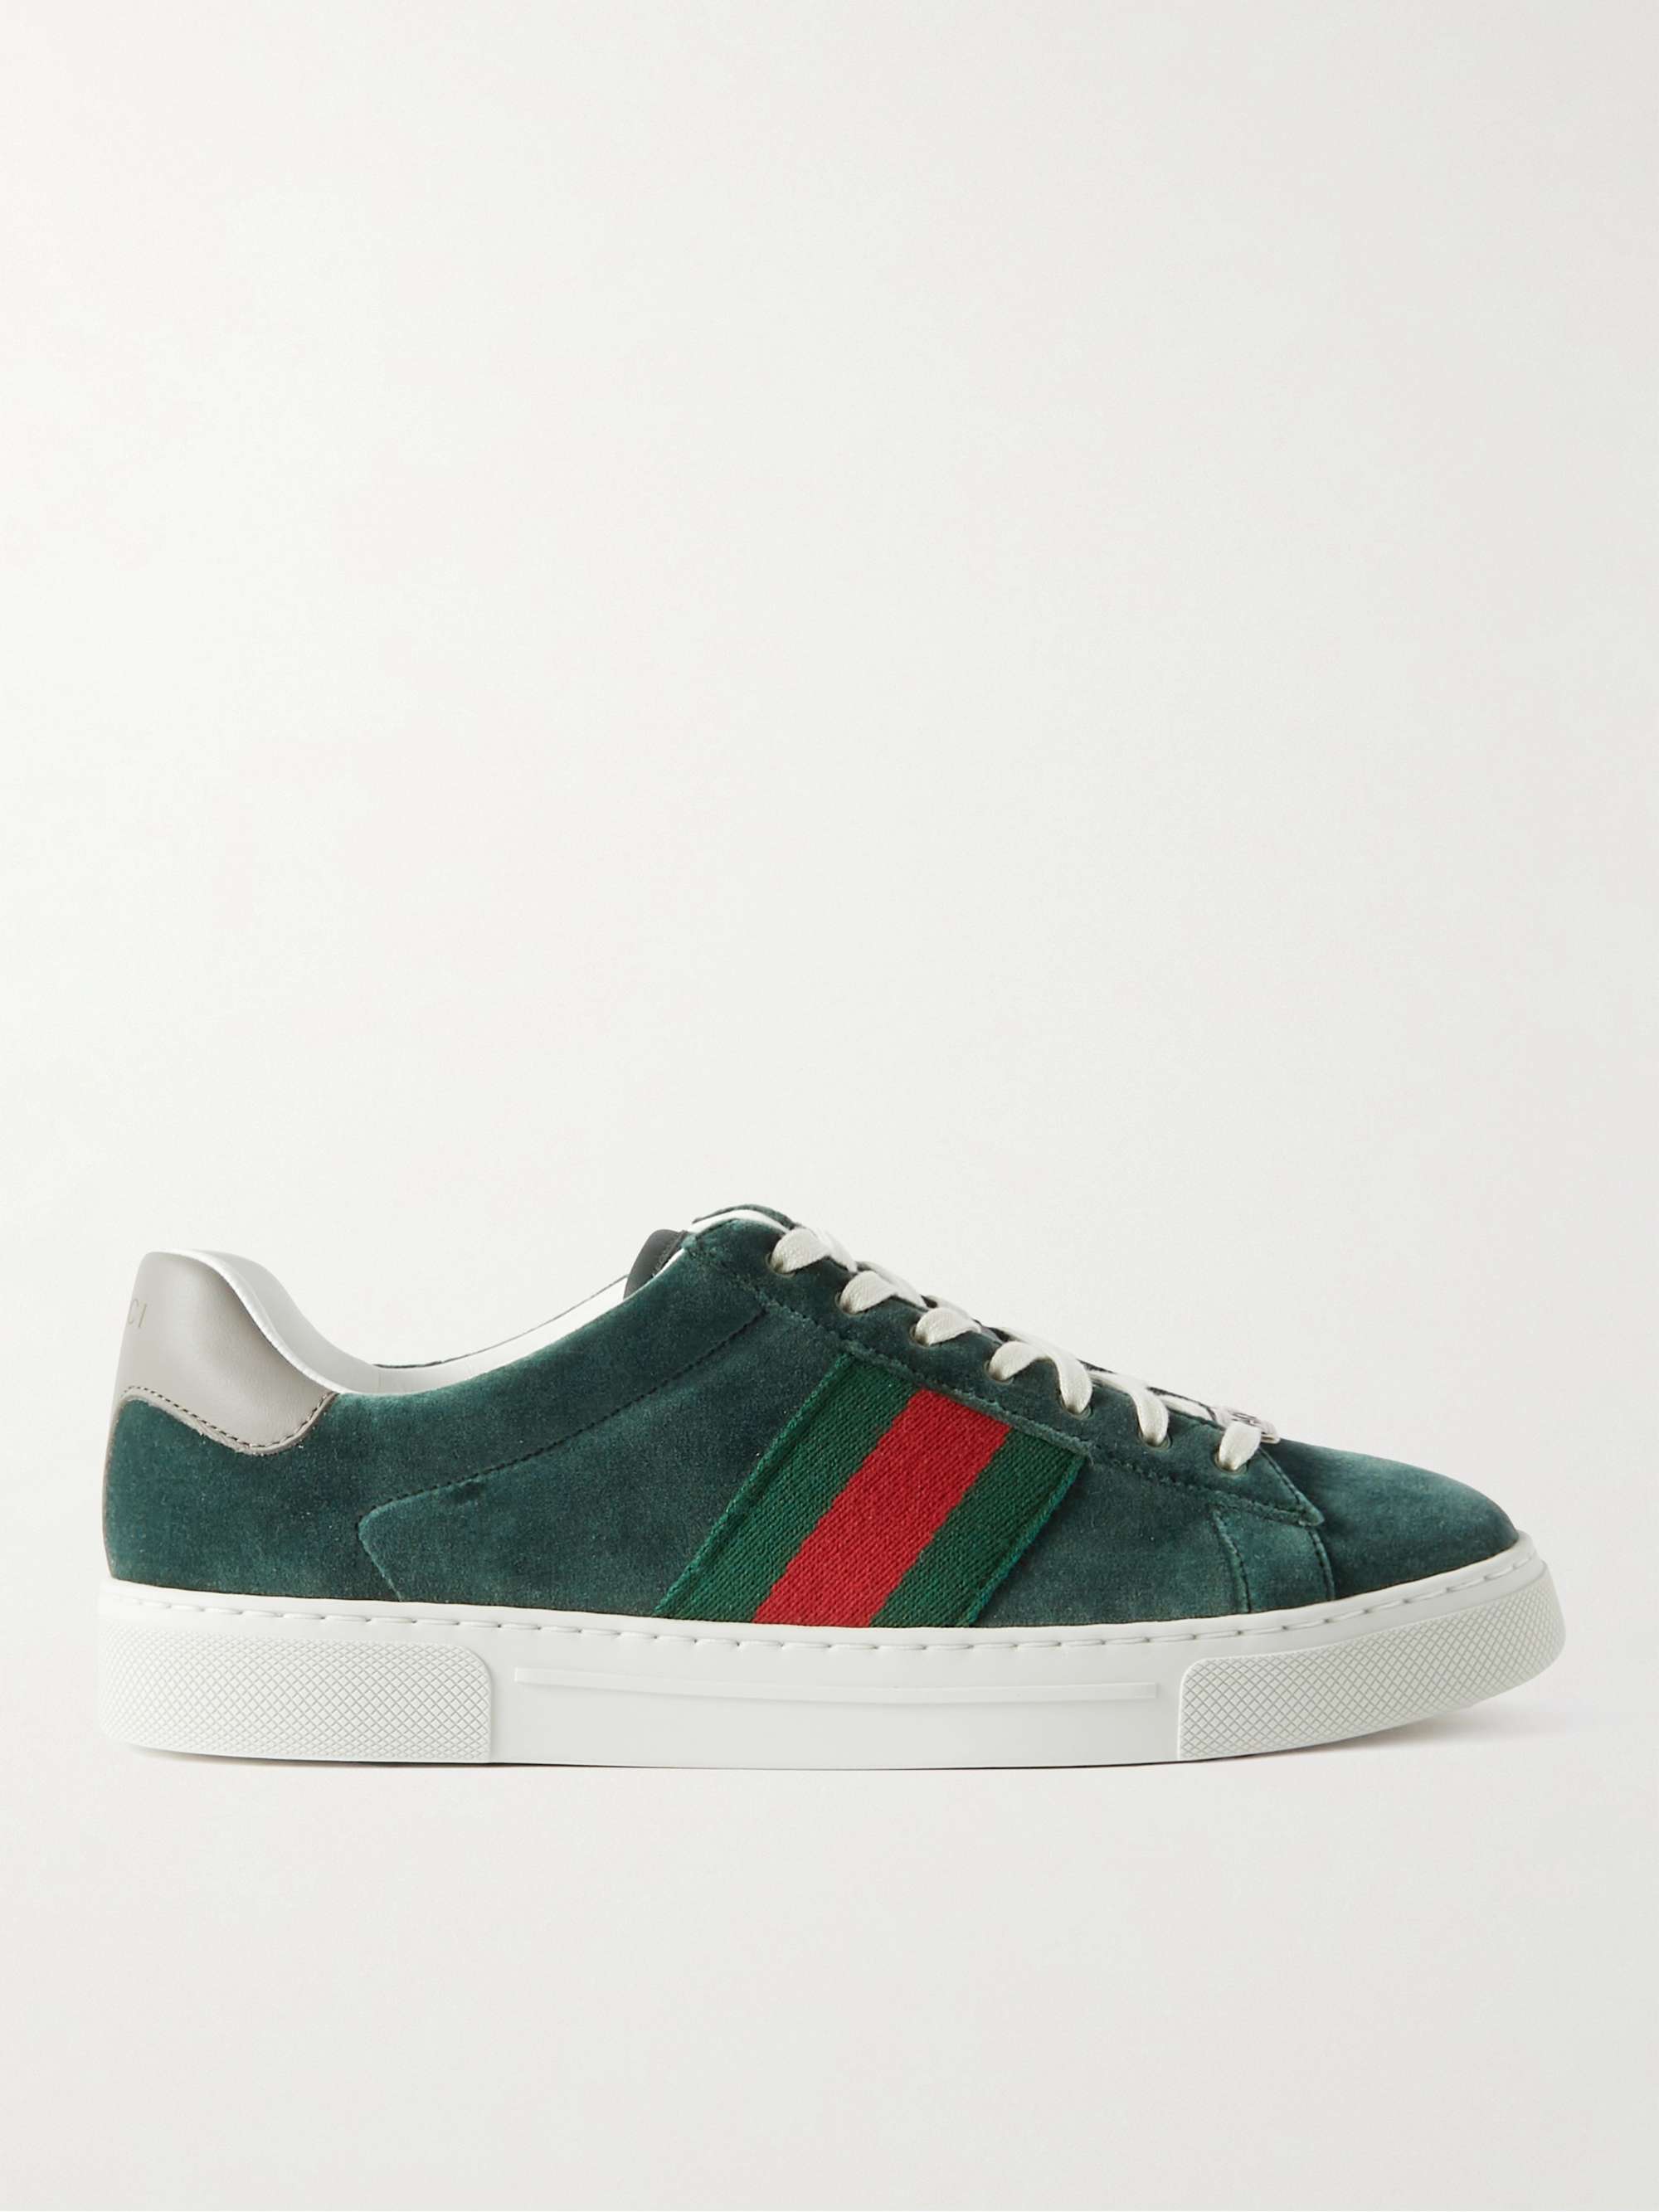 GUCCI Ace Leather-Trimmed Suede Sneakers for Men | MR PORTER